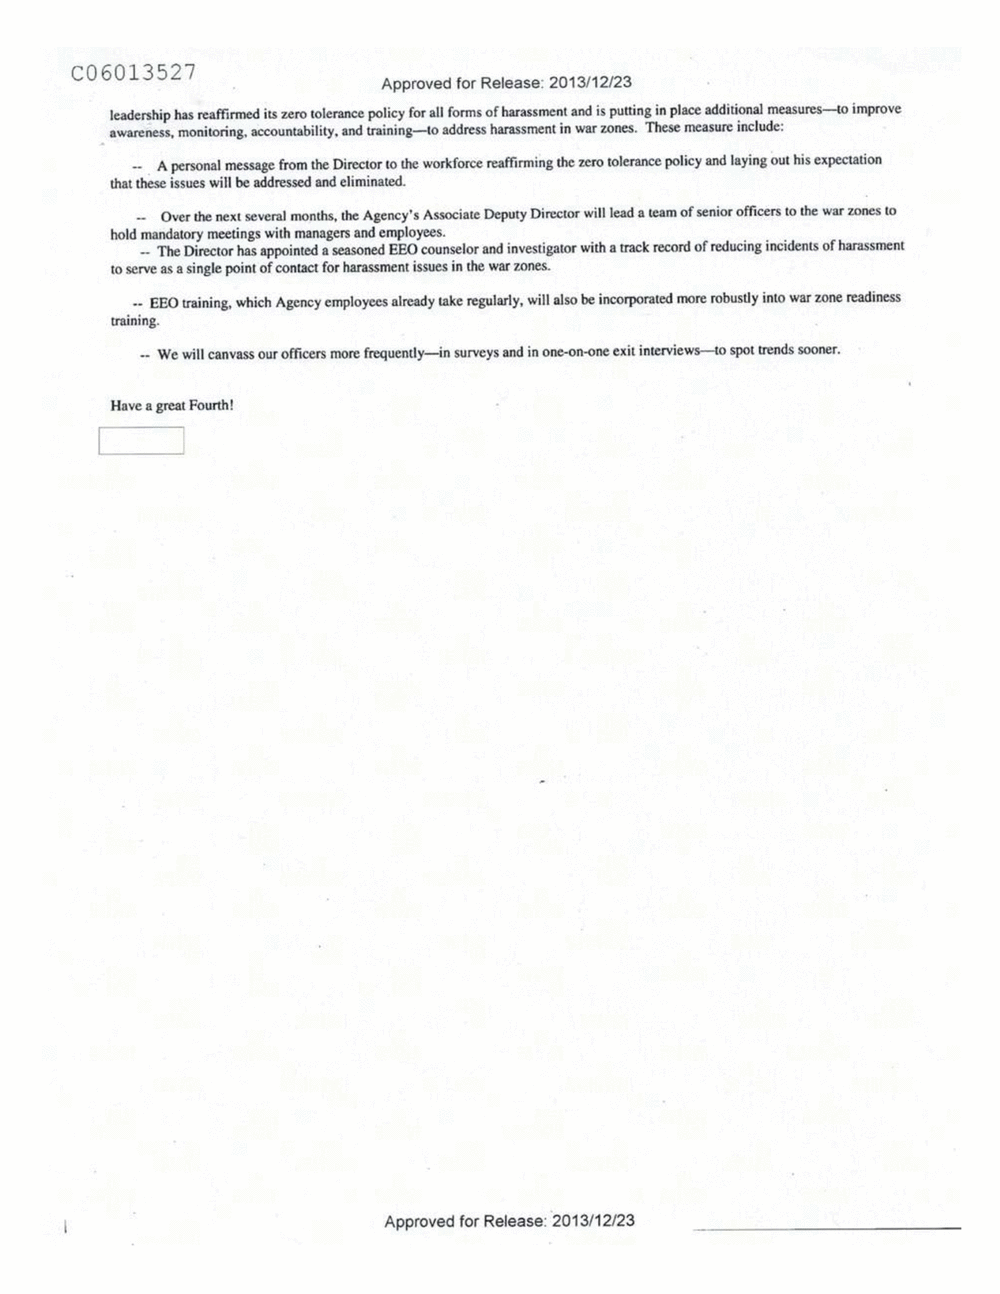 Page 368 from Email Correspondence Between Reporters and CIA Flacks